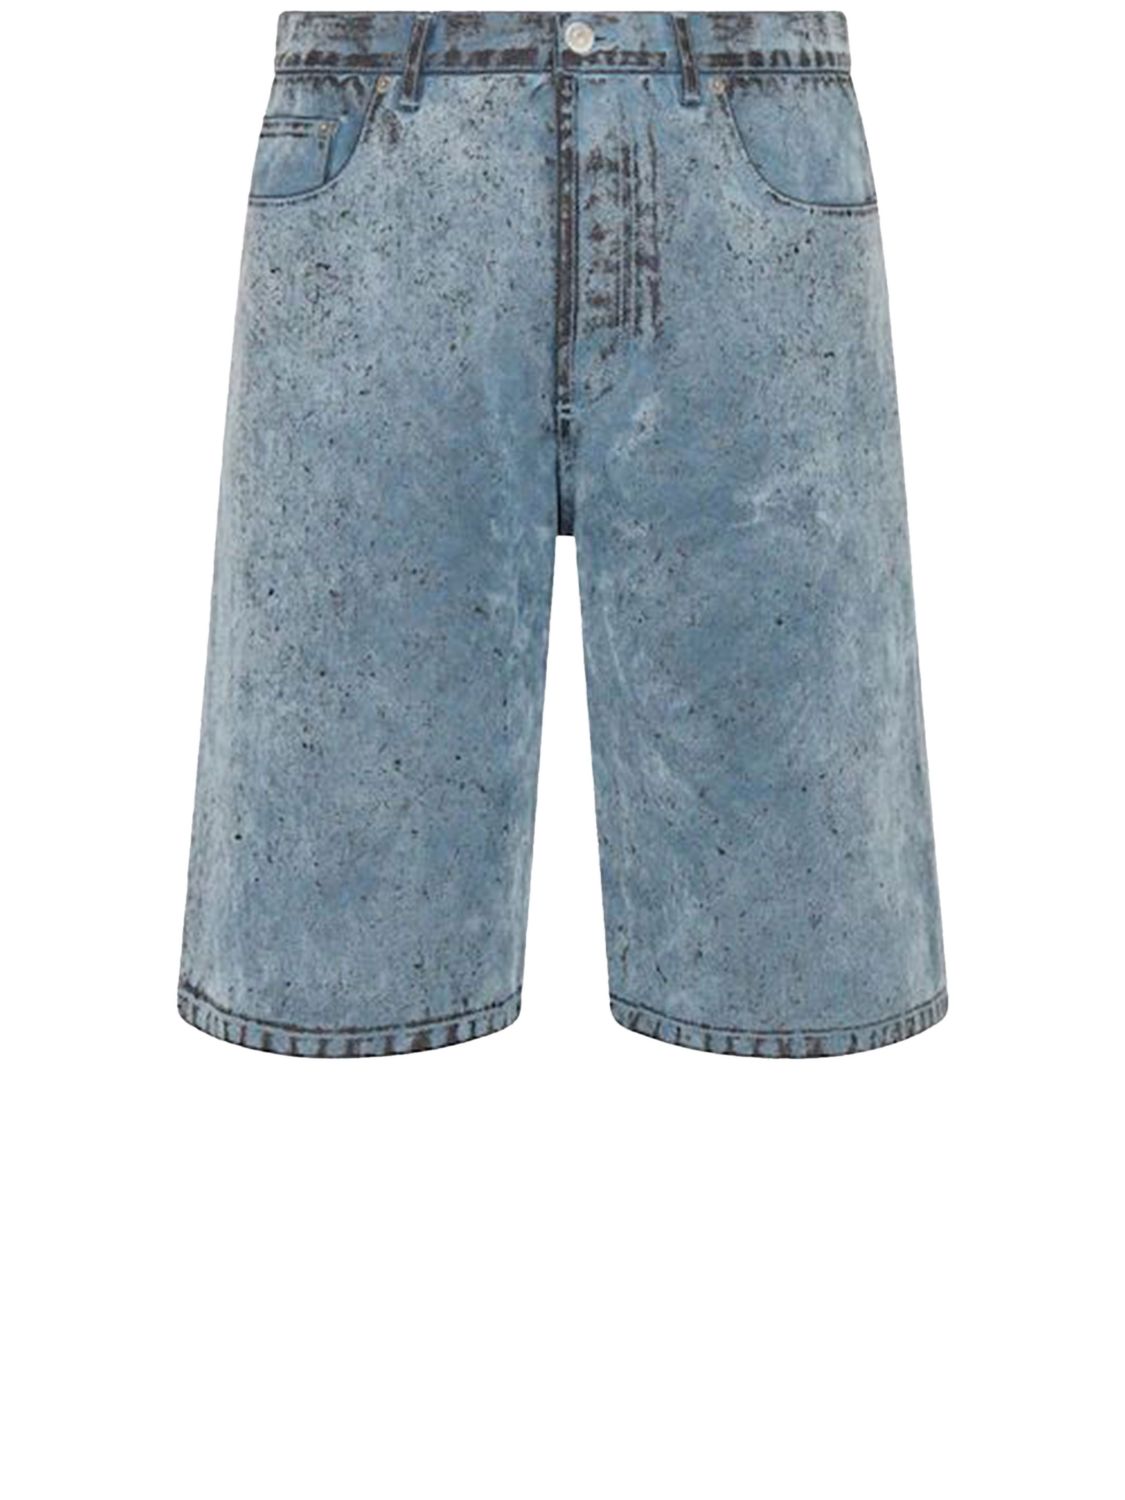 DIOR HOMME Blue Cotton Denim Bermuda Shorts from Dior by ERL Collection for Men